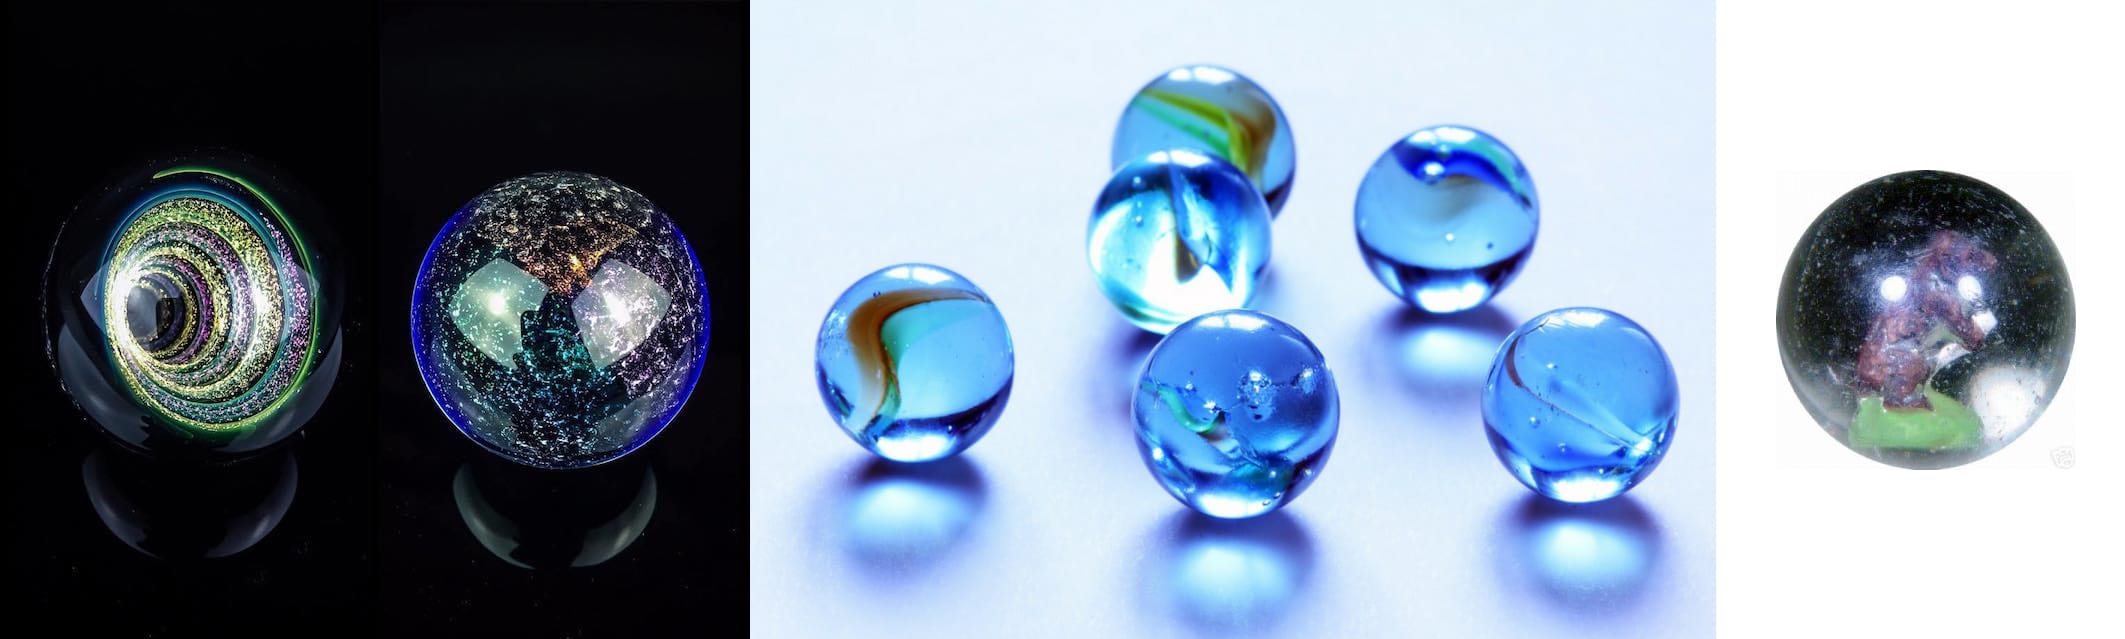 Image of marbles of various colors.